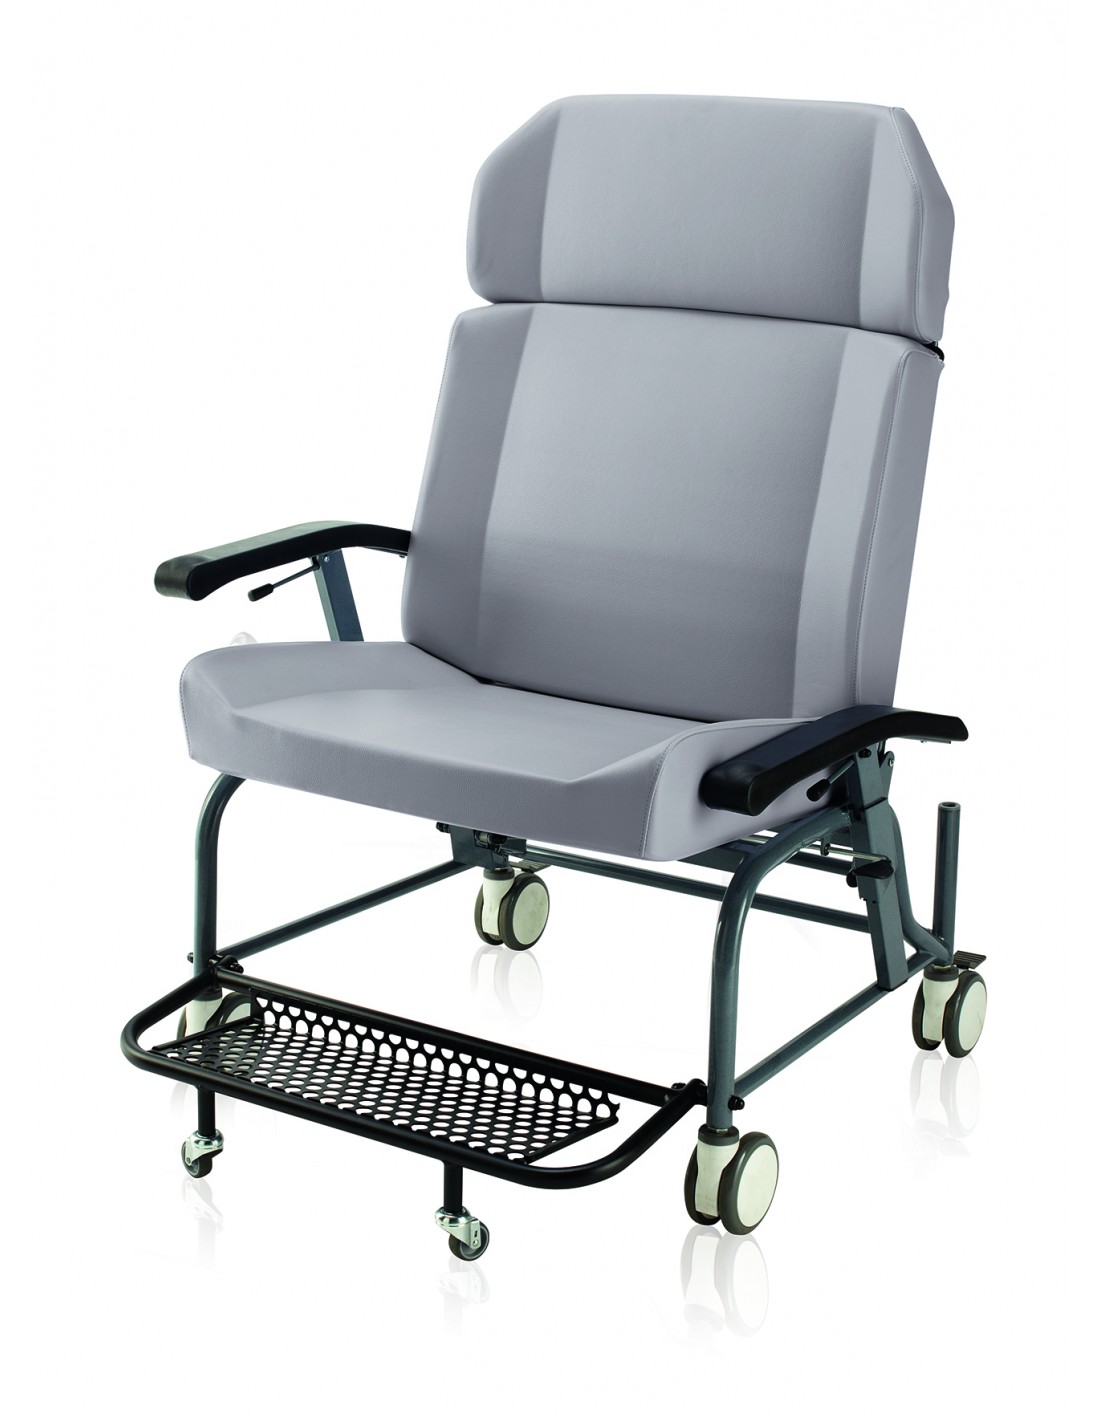 Quiego 3500 Fortissimo Bariatric Chair 1